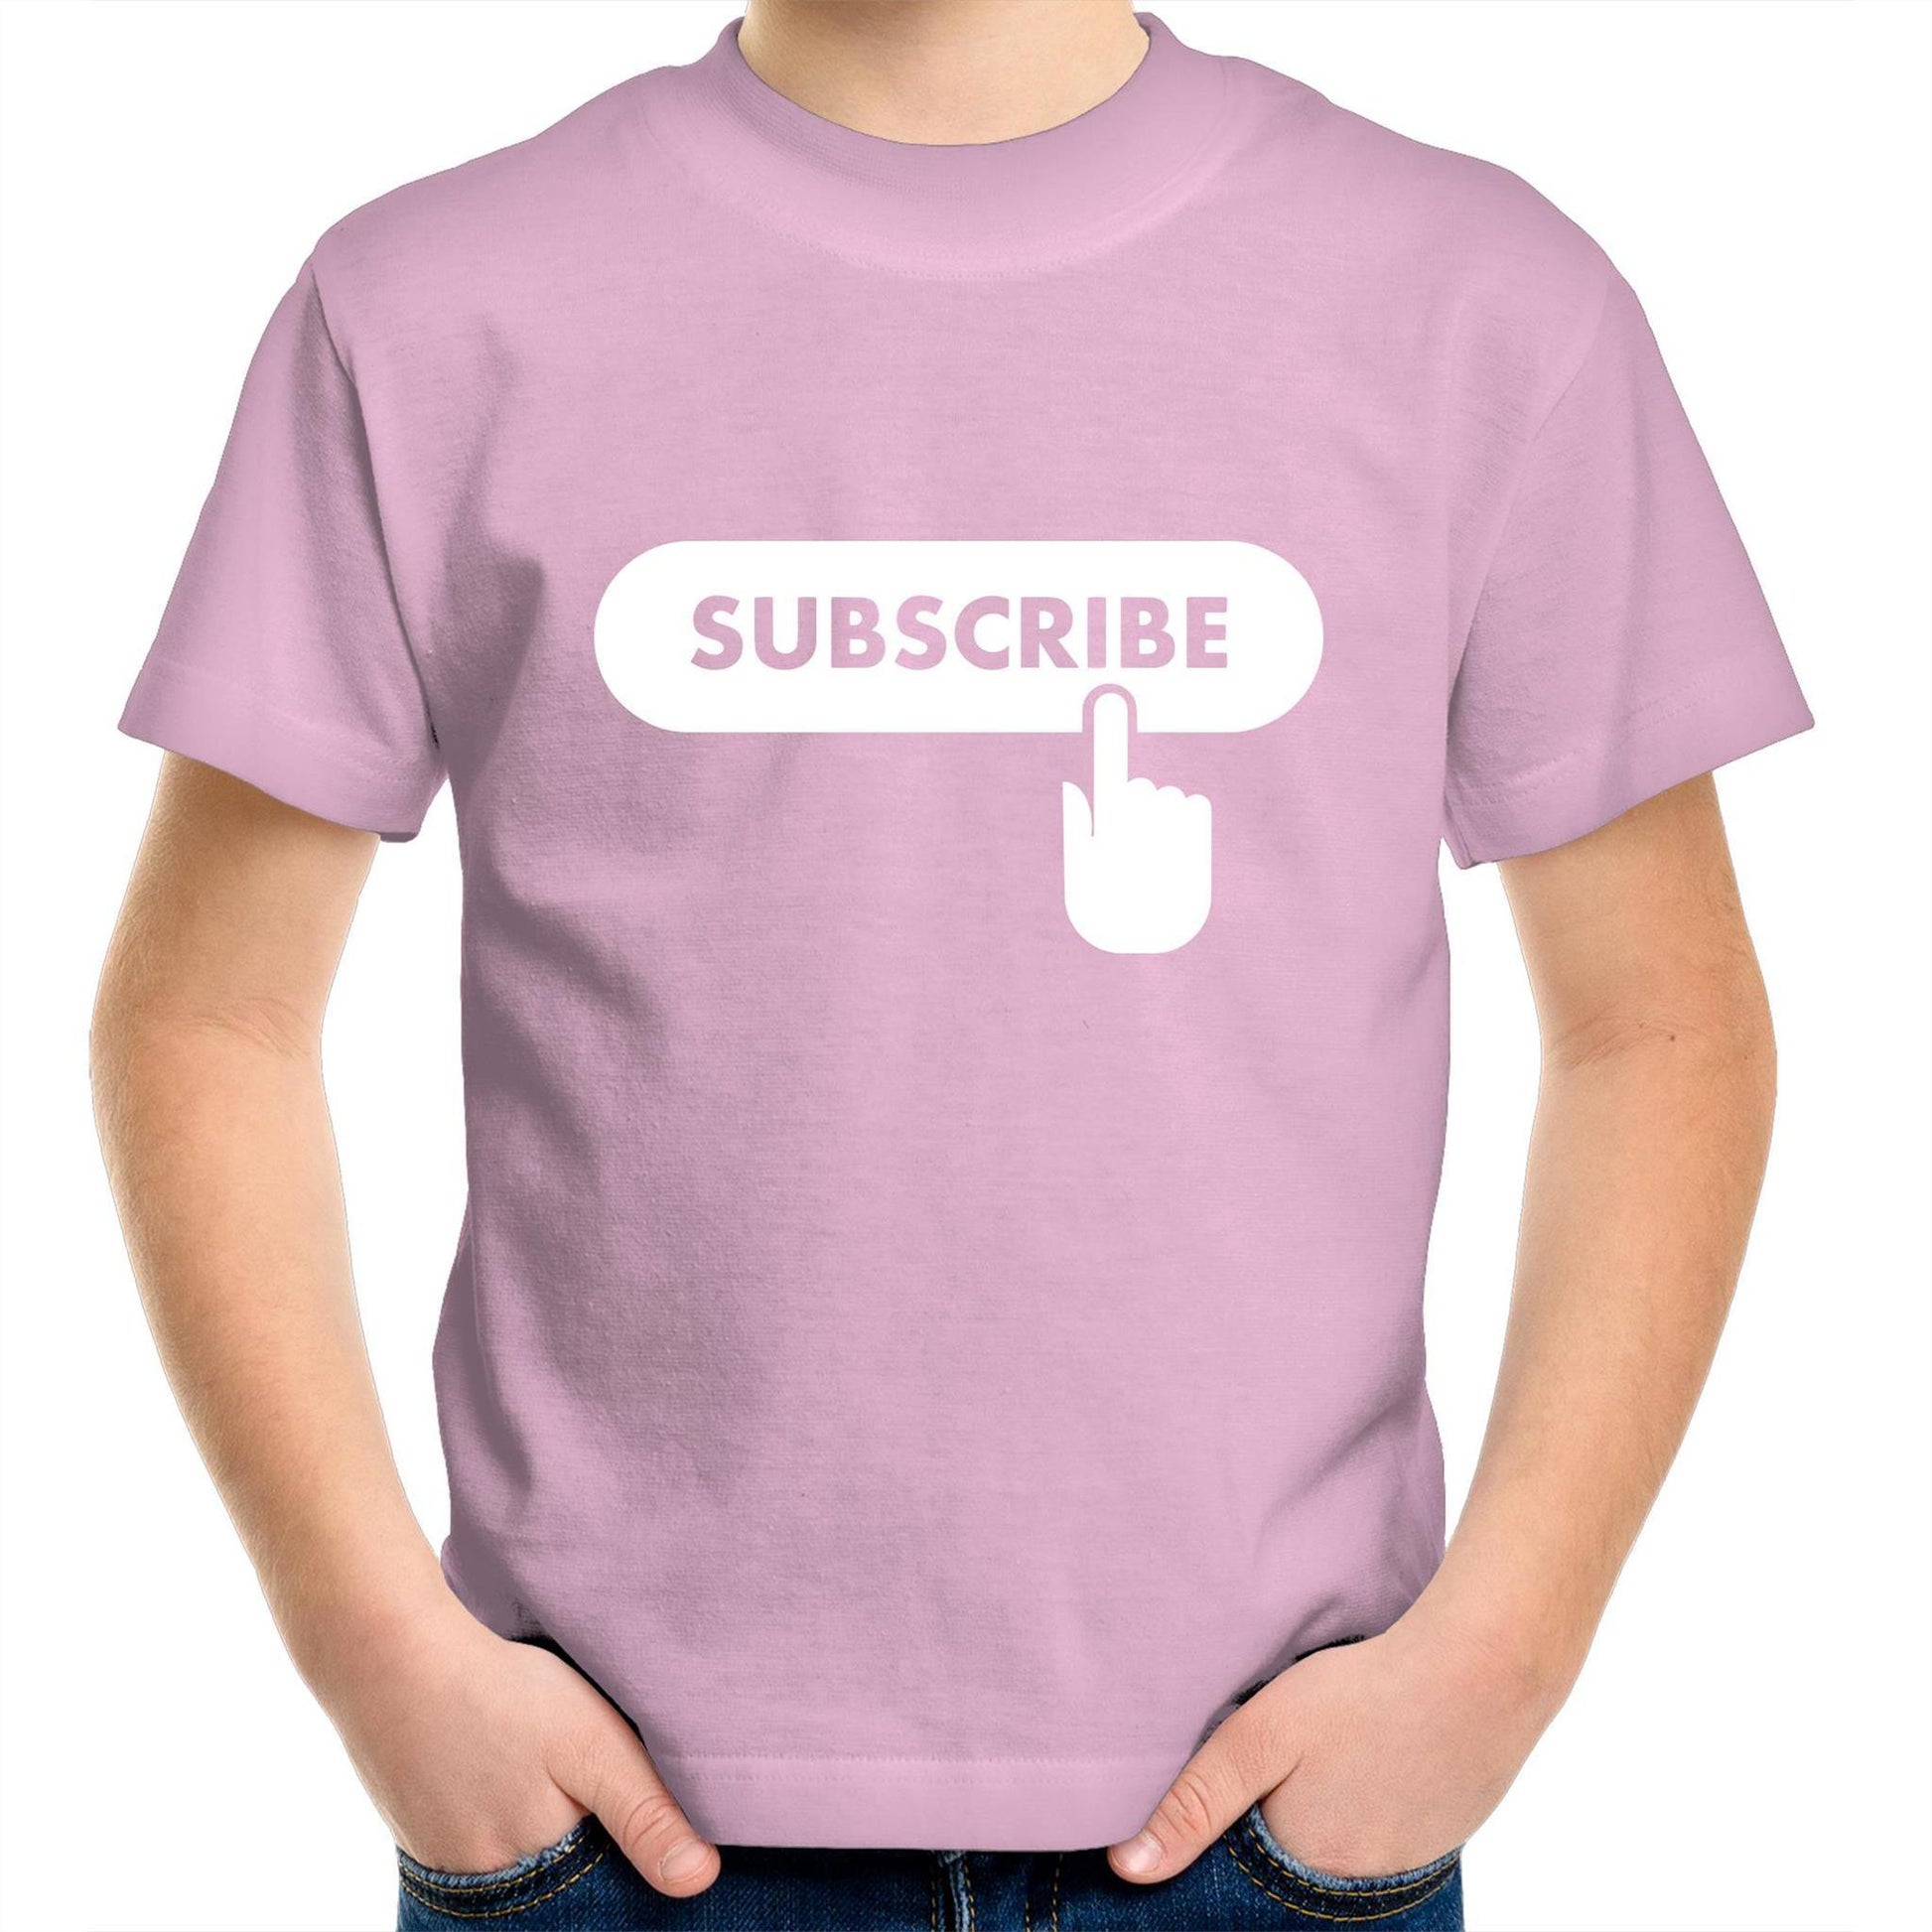 Subscribe - Kids Youth Crew T-Shirt Pink Kids Youth T-shirt Funny